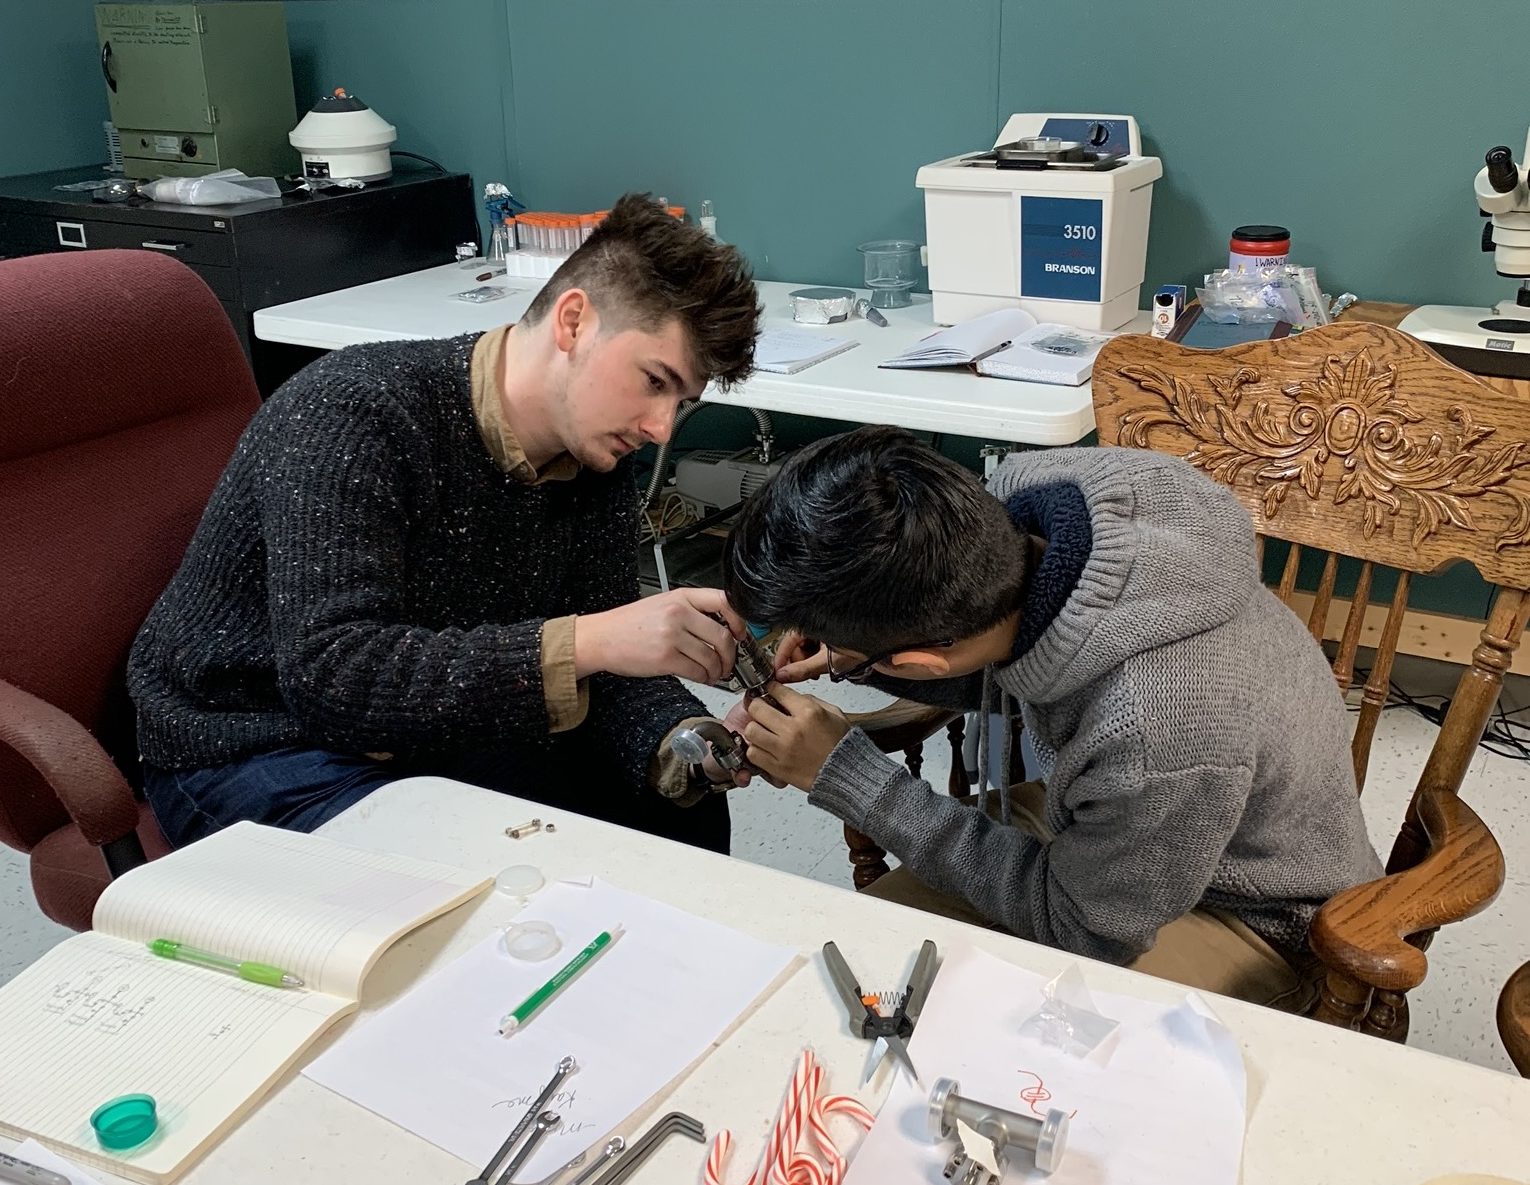 Rudy (left) working with a local high-schooler (right) at Shumla's lab.